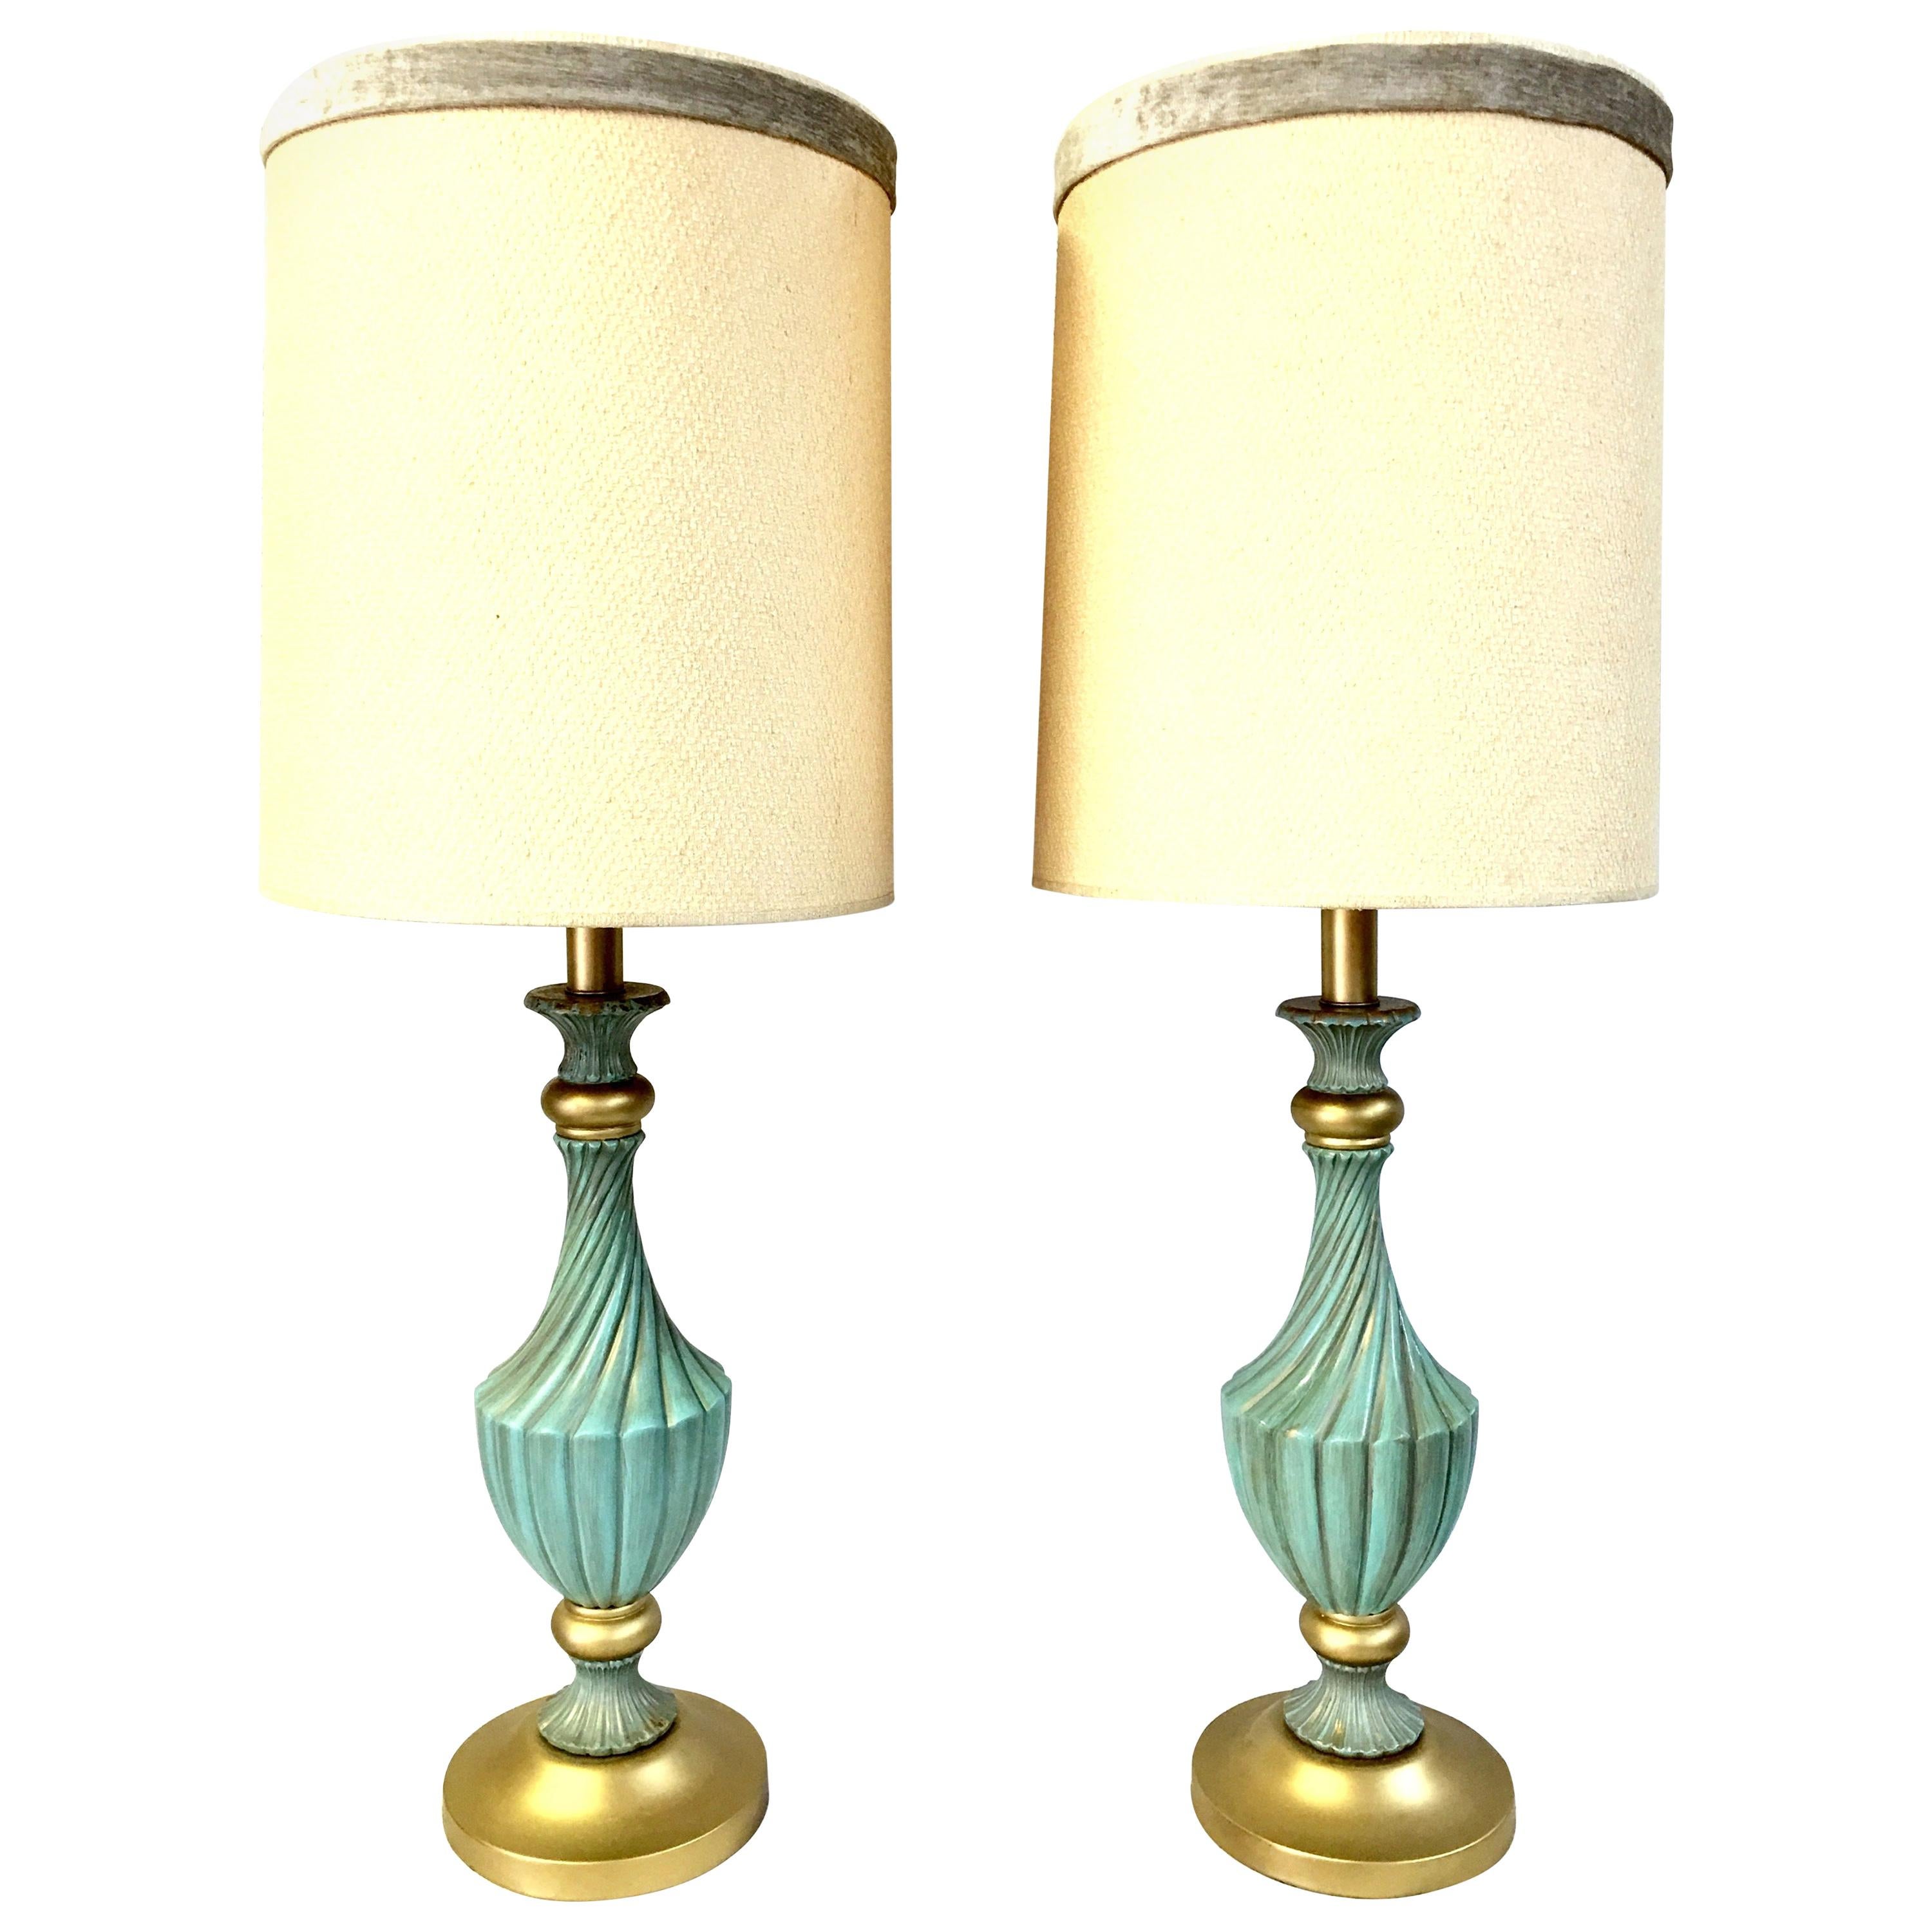 20th Century Pair of Neoclassical Style Ceramic & Brass Lamps by, Stiffel For Sale